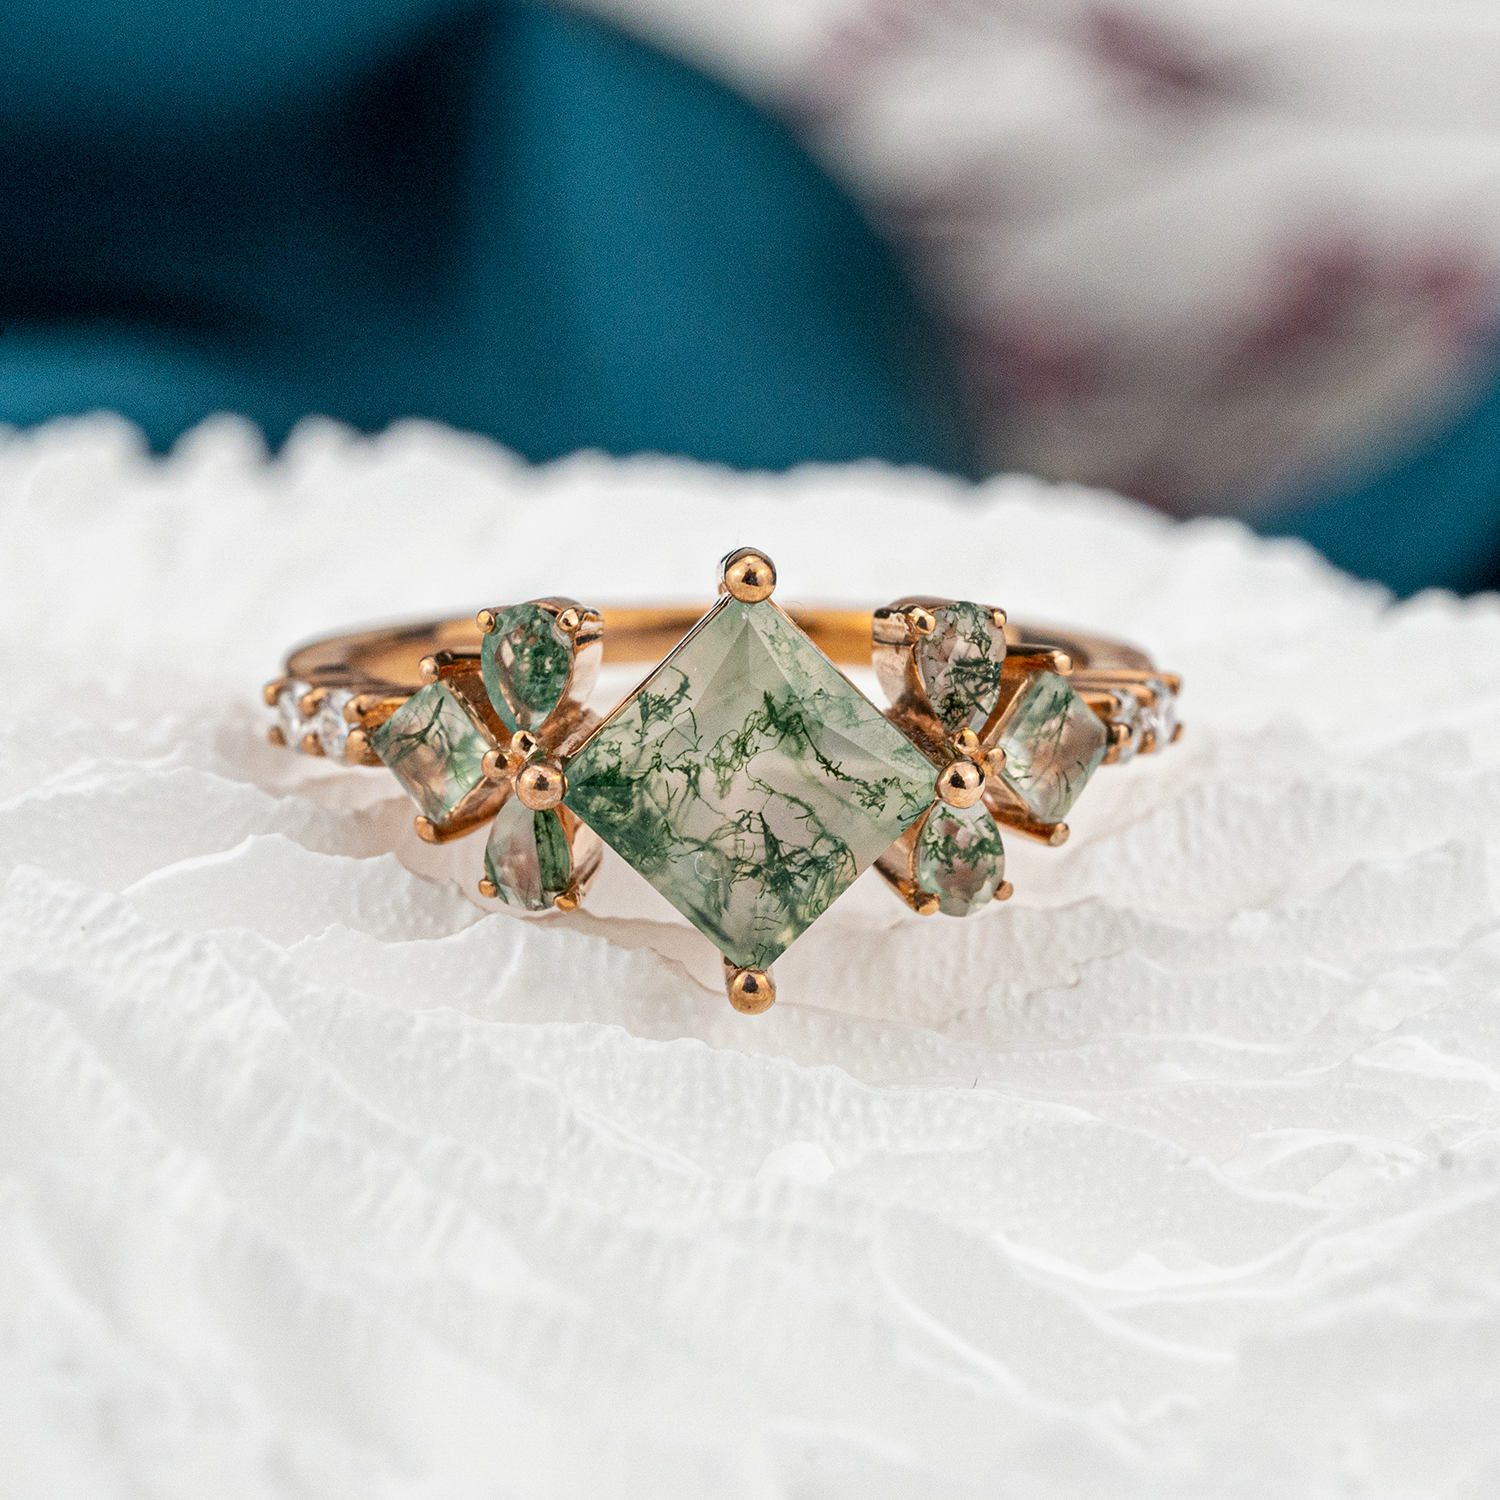 Princess Cut Moss Agate Ring Engagement Ring With Moissanite